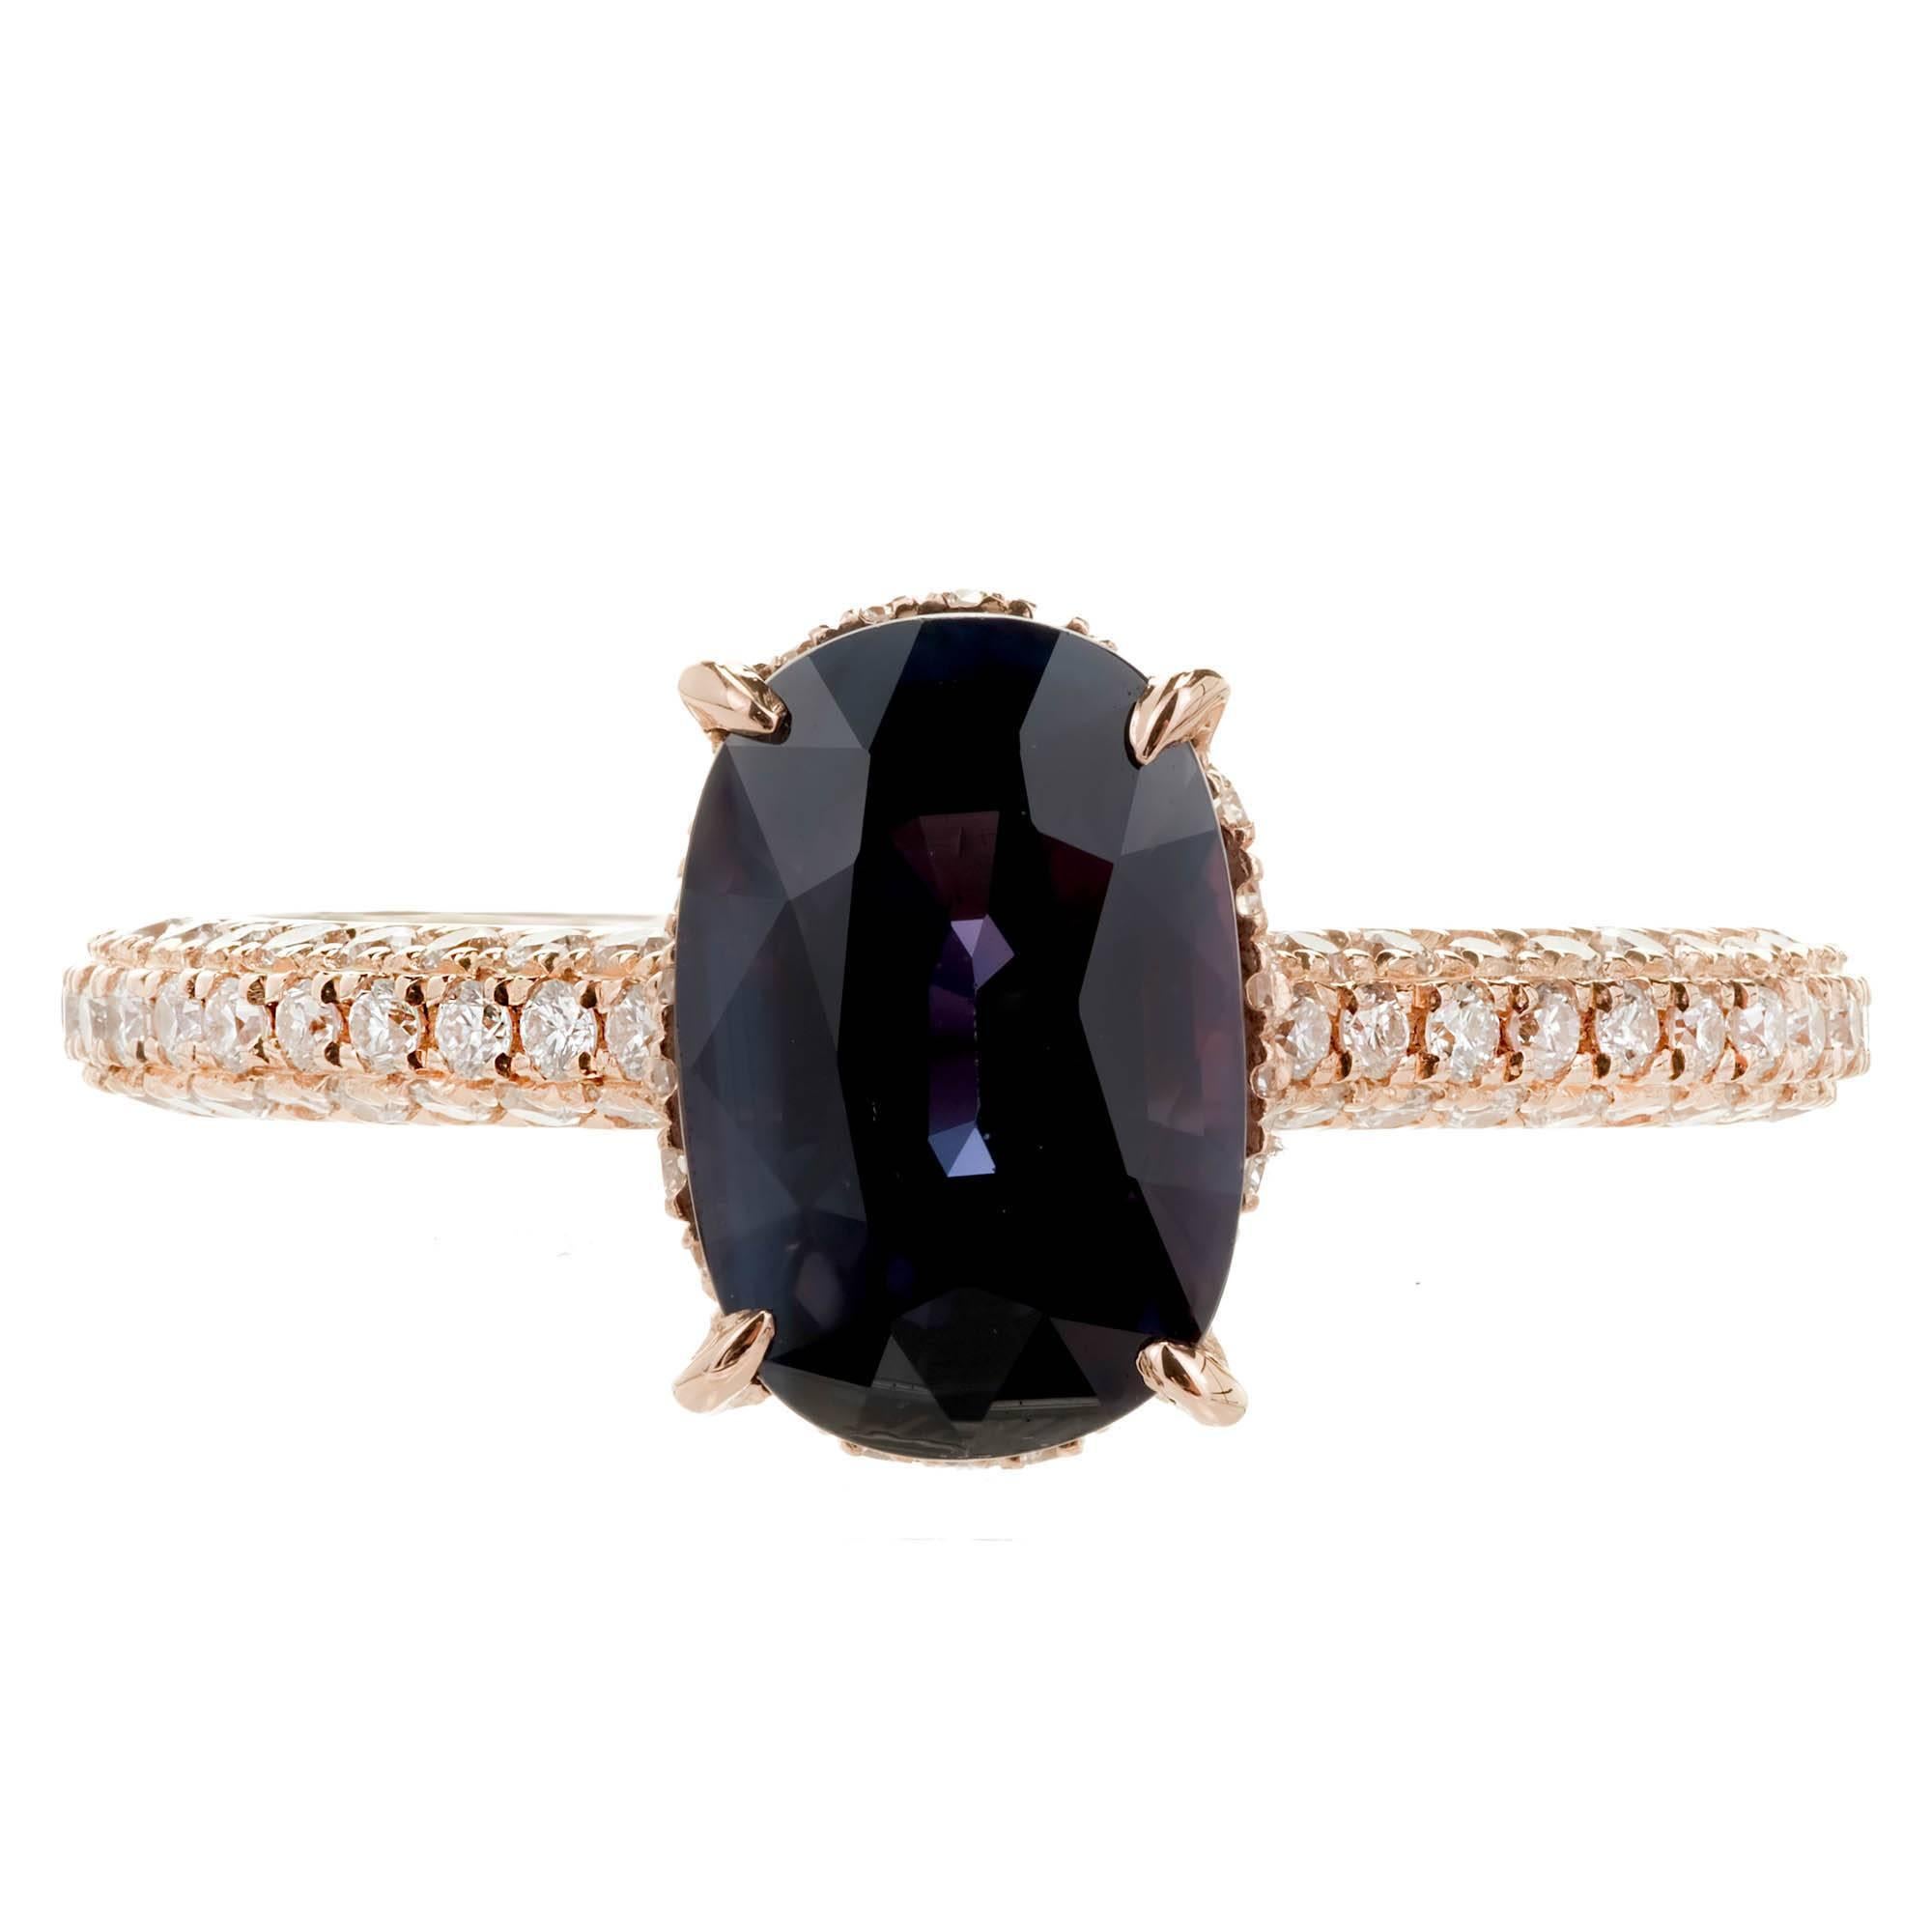 GIA certified natural color change cushion cut Sapphire diamond engagement ring in a 14k rose gold setting by designer Chateau. At the center of this ring is 
 2.08ct oval sapphire which changes from dark blue and dark purple in different lighting.